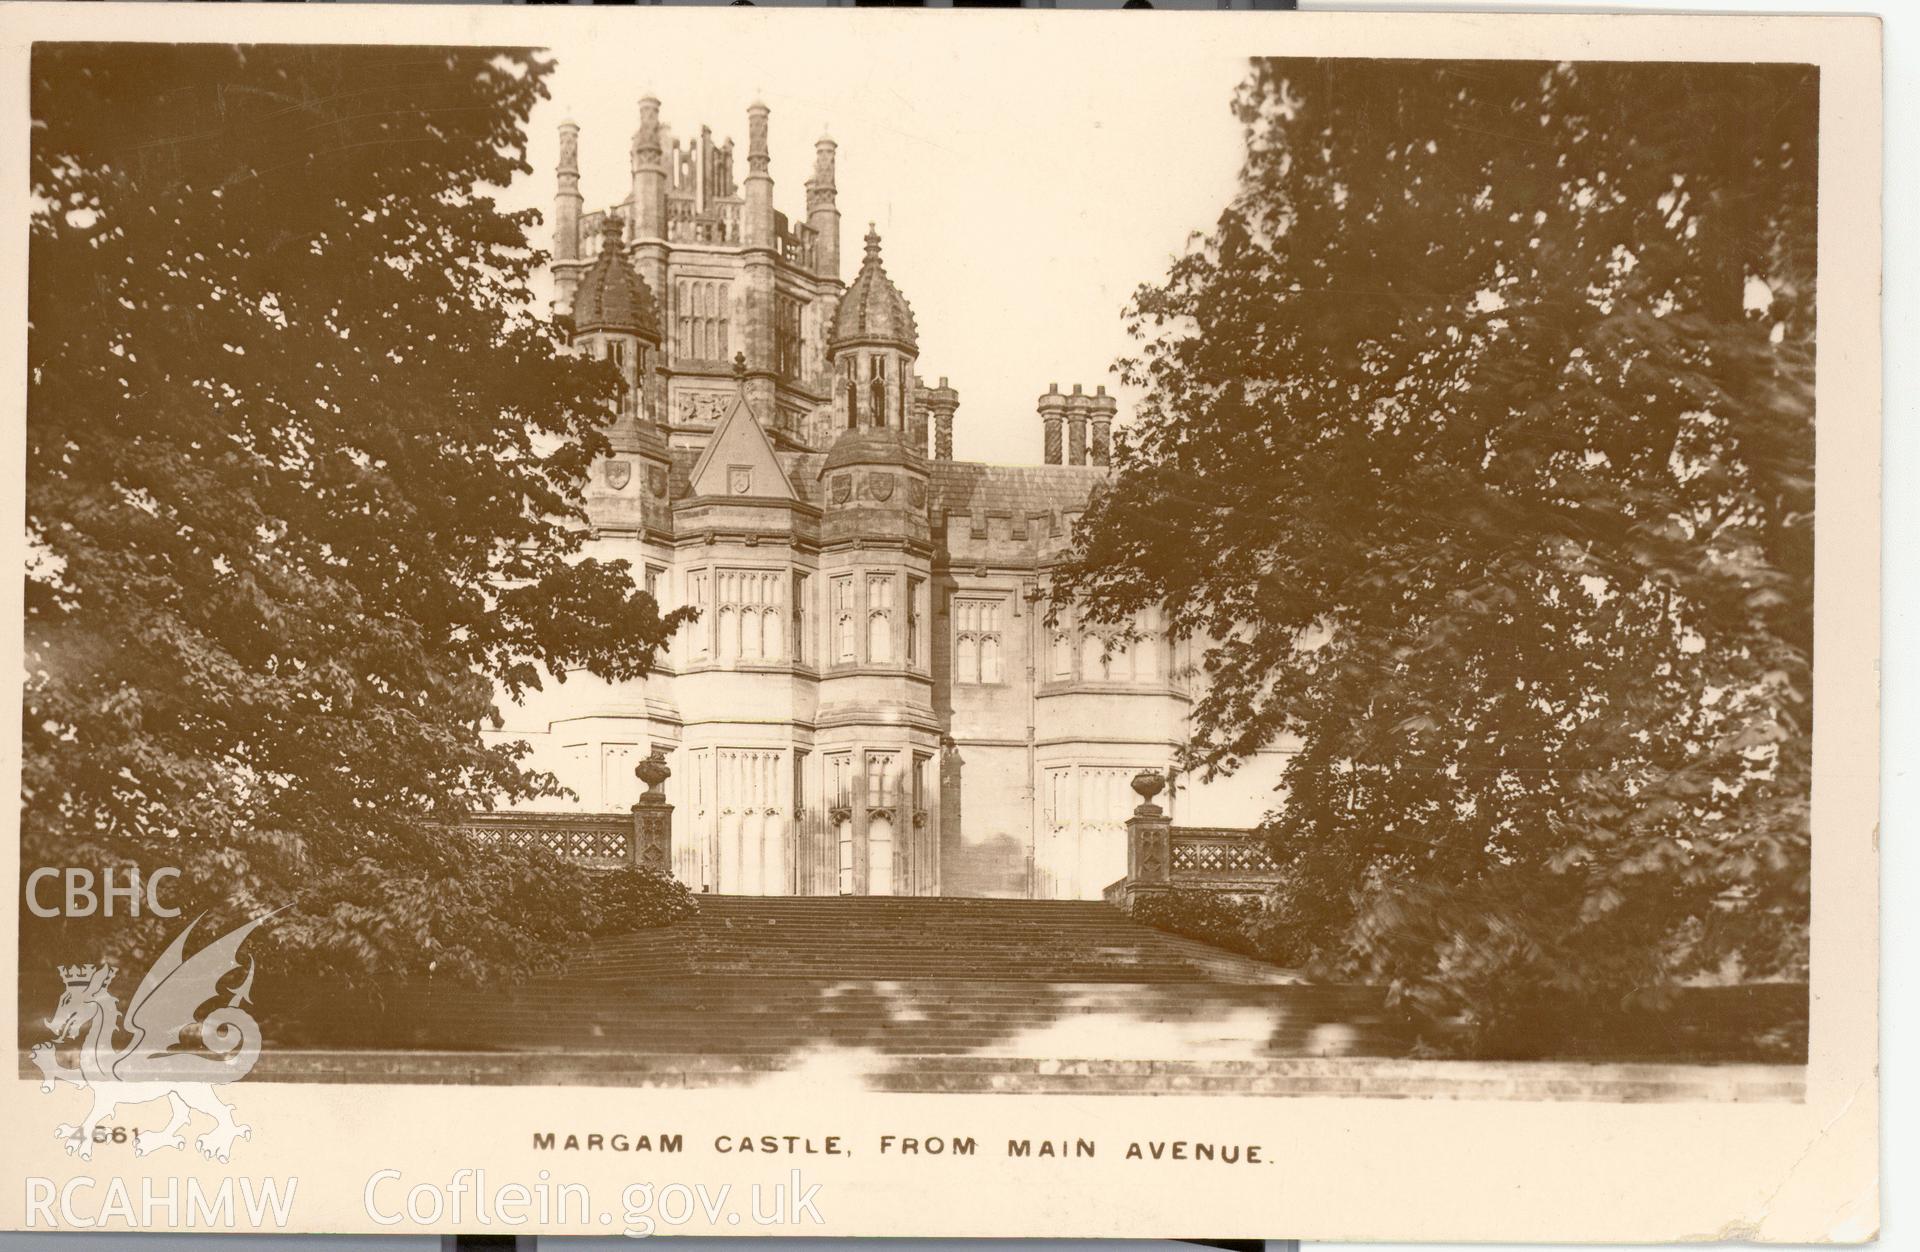 Digitised postcard image of Margam Castle, Kingsway real Photo series. Produced by Parks and Gardens Data Services, from an original item in the Peter Davis Collection at Parks and Gardens UK. We hold only web-resolution images of this collection, suitable for viewing on screen and for research purposes only. We do not hold the original images, or publication quality scans.